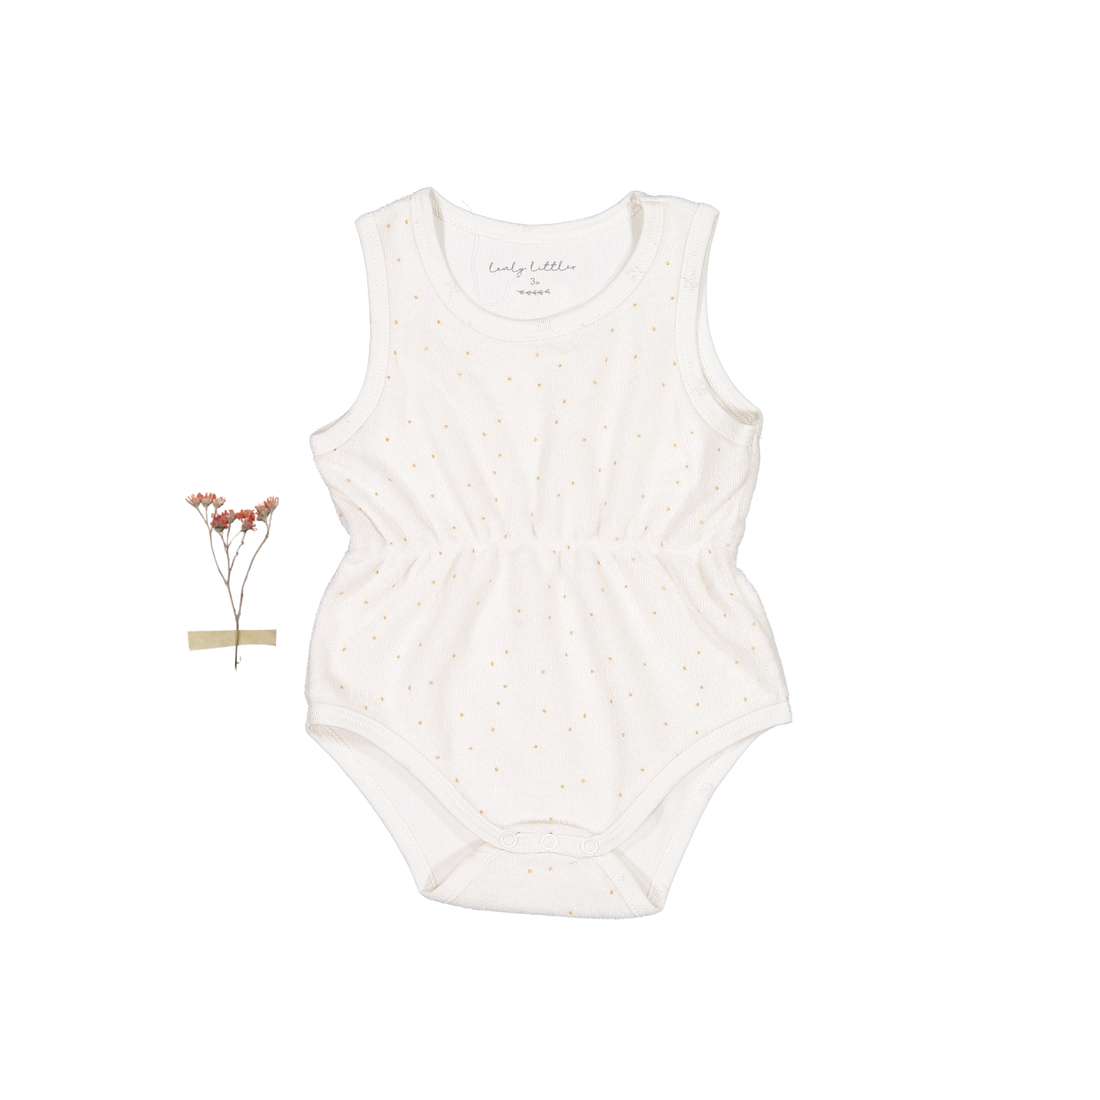 The Terry Romper - Pearl Dot